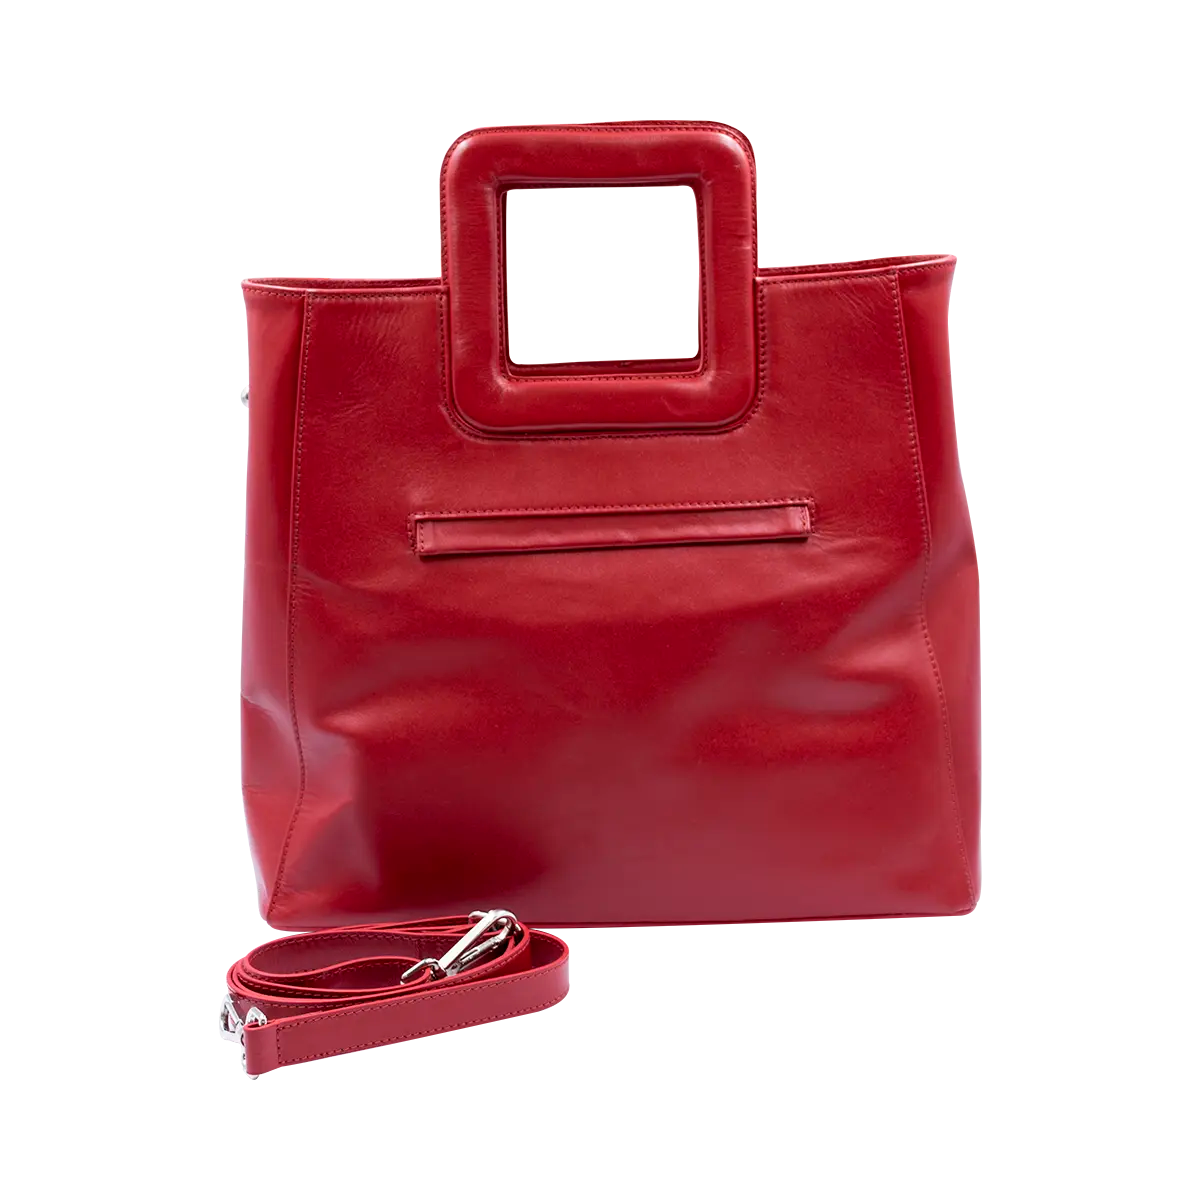 large red leather print handbag with a square handle. Accessory for women in San Diego, CA.